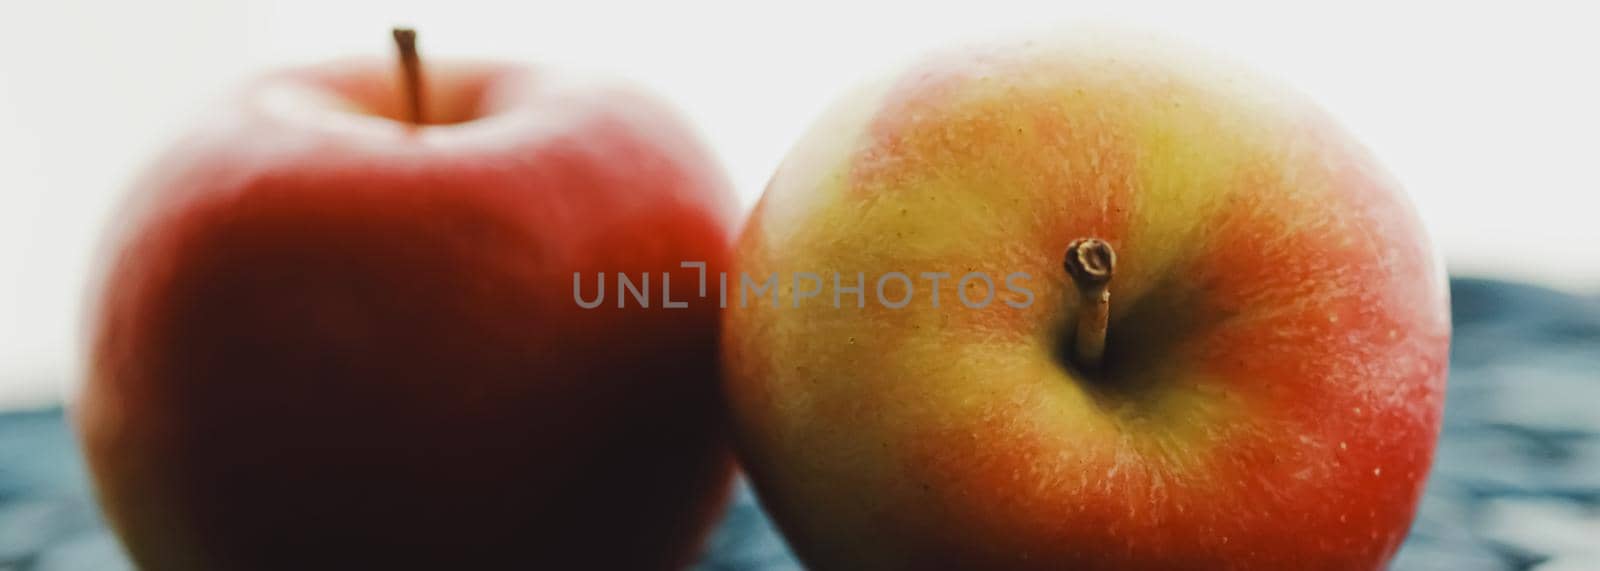 Two fresh ripe small apples, fruits and organic food concept